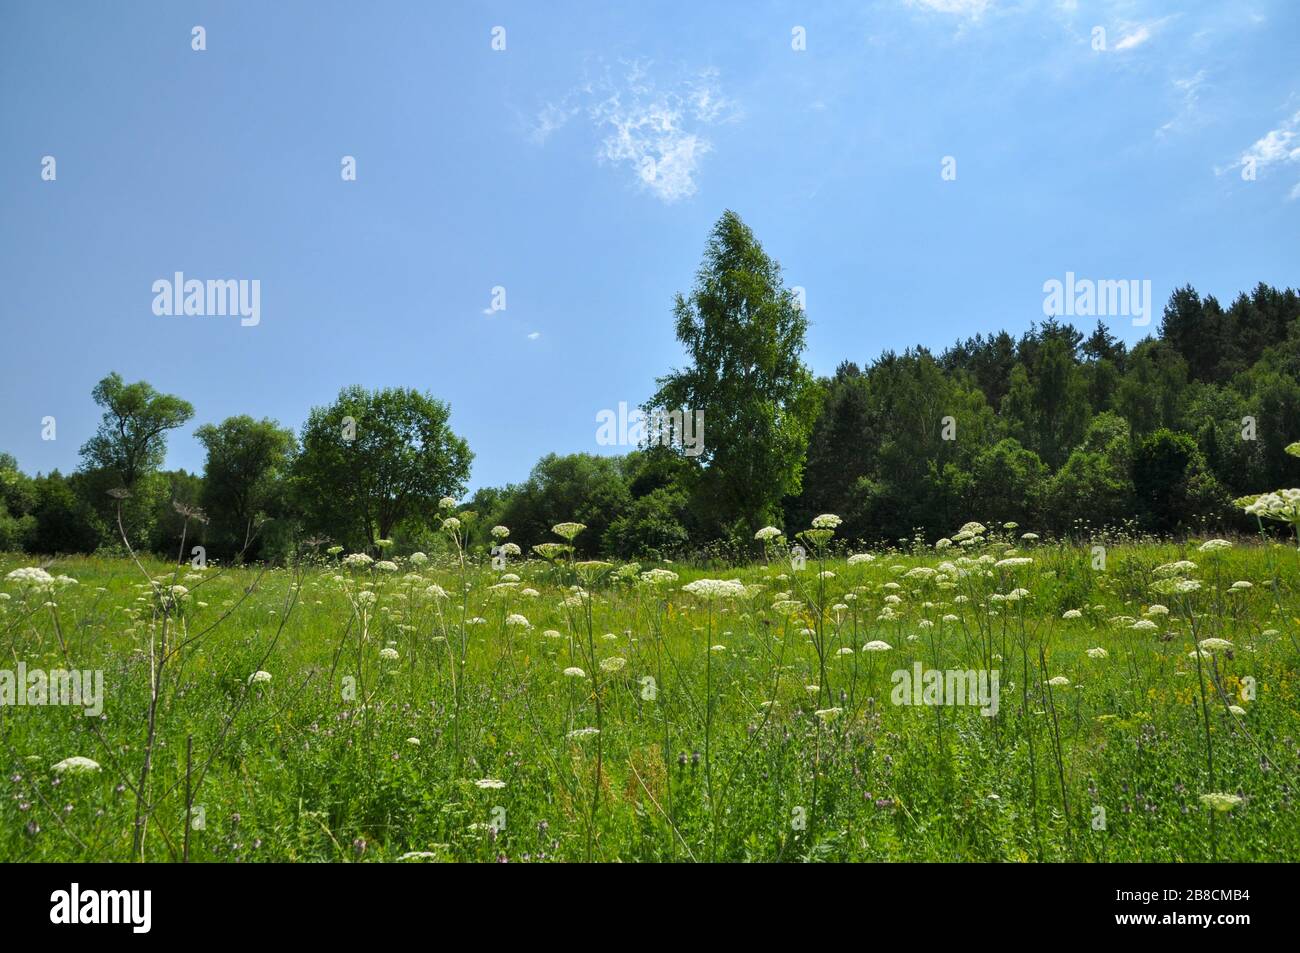 Pastoral summer landscape with meadow flowers in the foreground, forest in the background and blue sky. Stock Photo